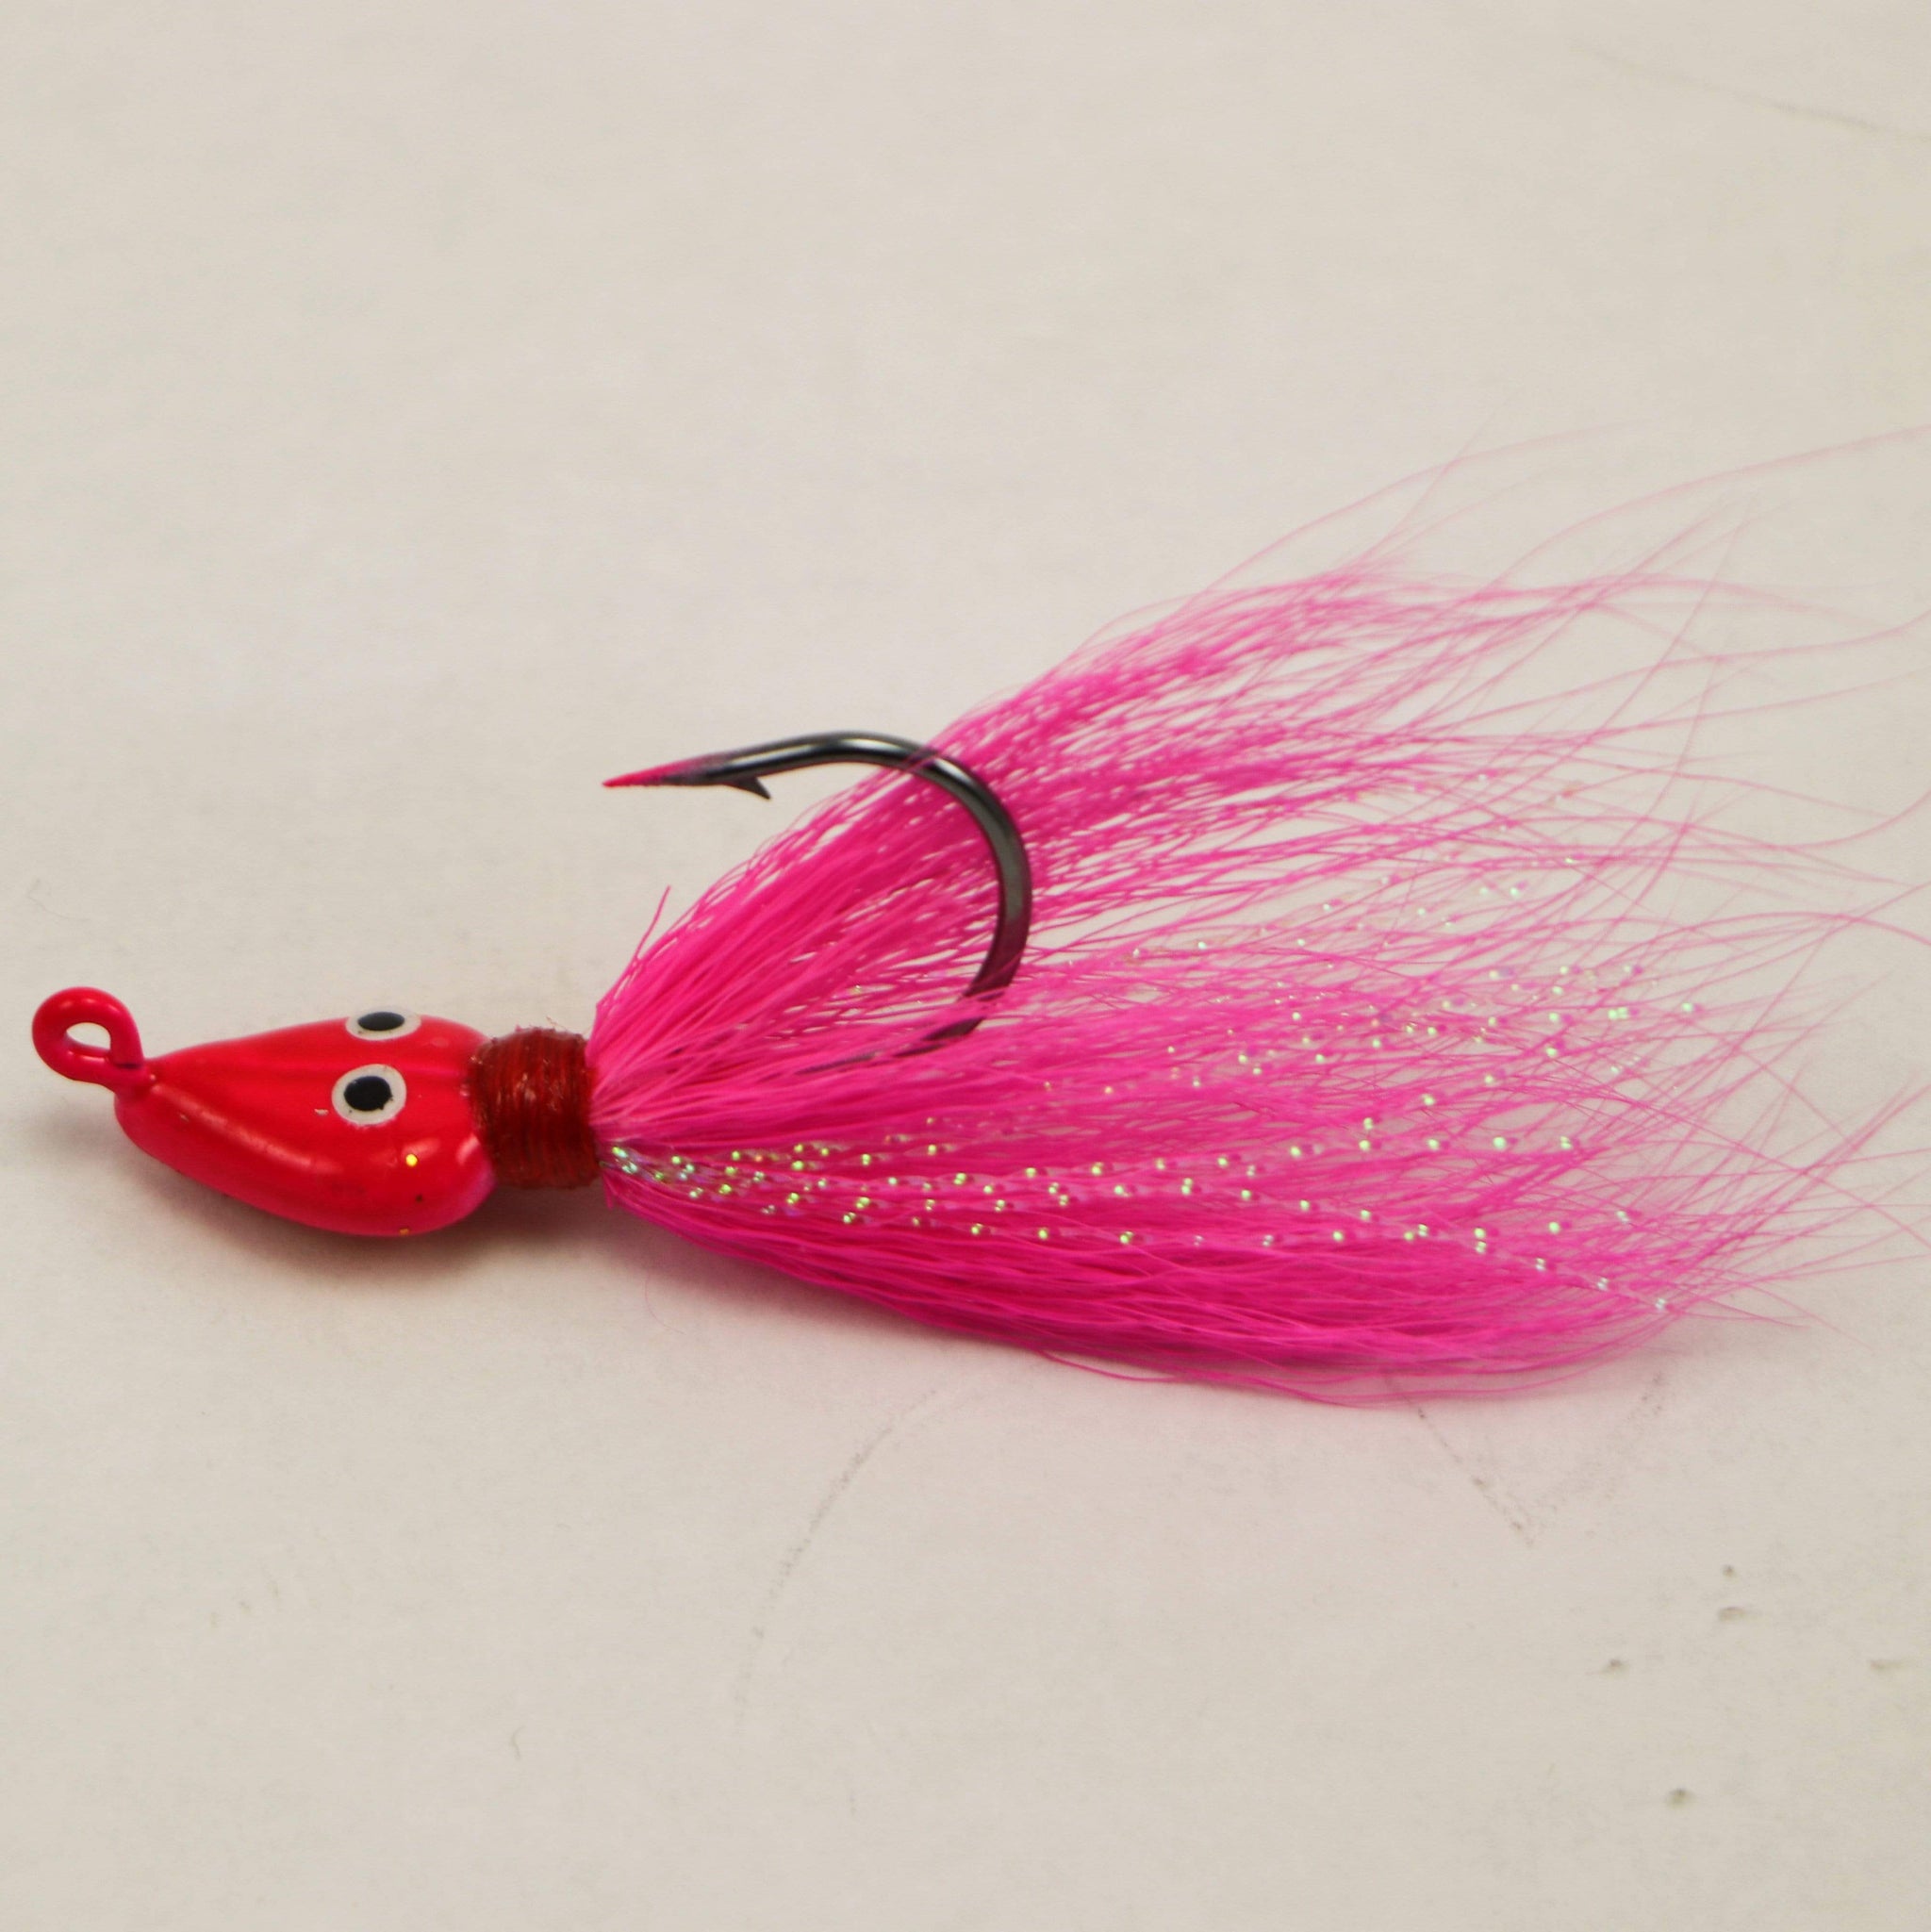 A jighead and chartreuse/pink soft-plastic trailer still gets the